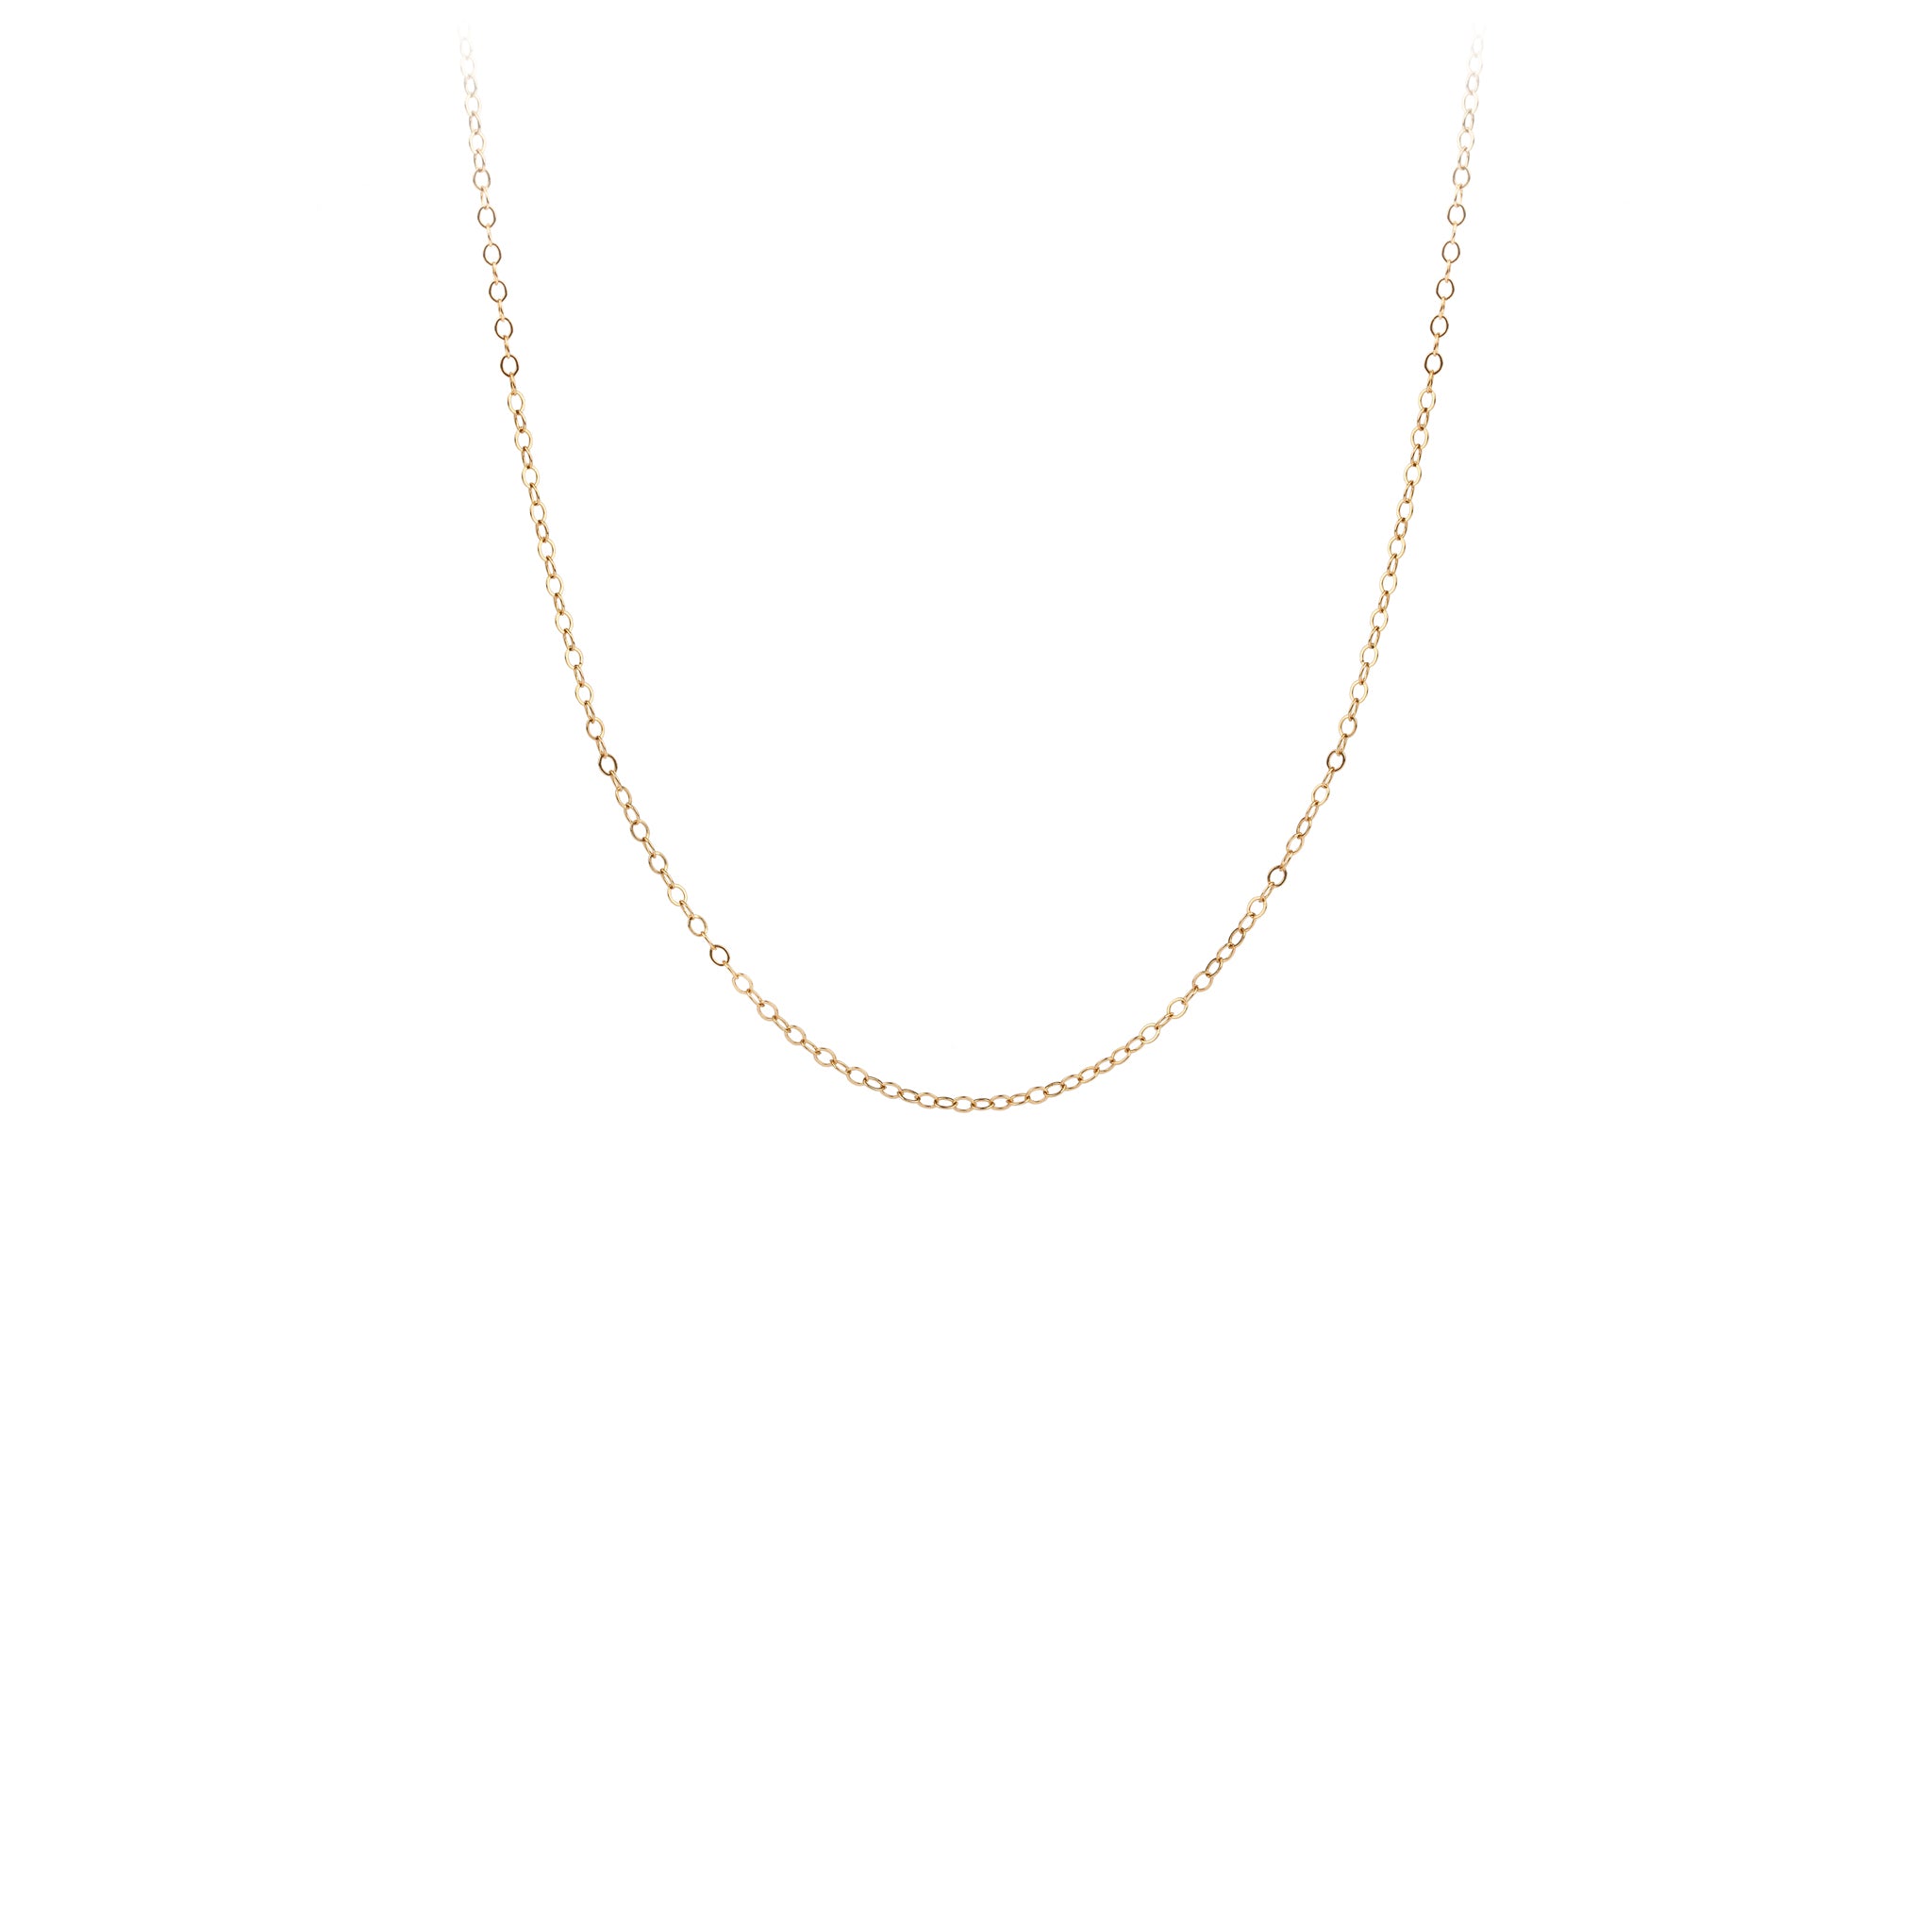 A 14 karat gold chain with extra light flat oval links